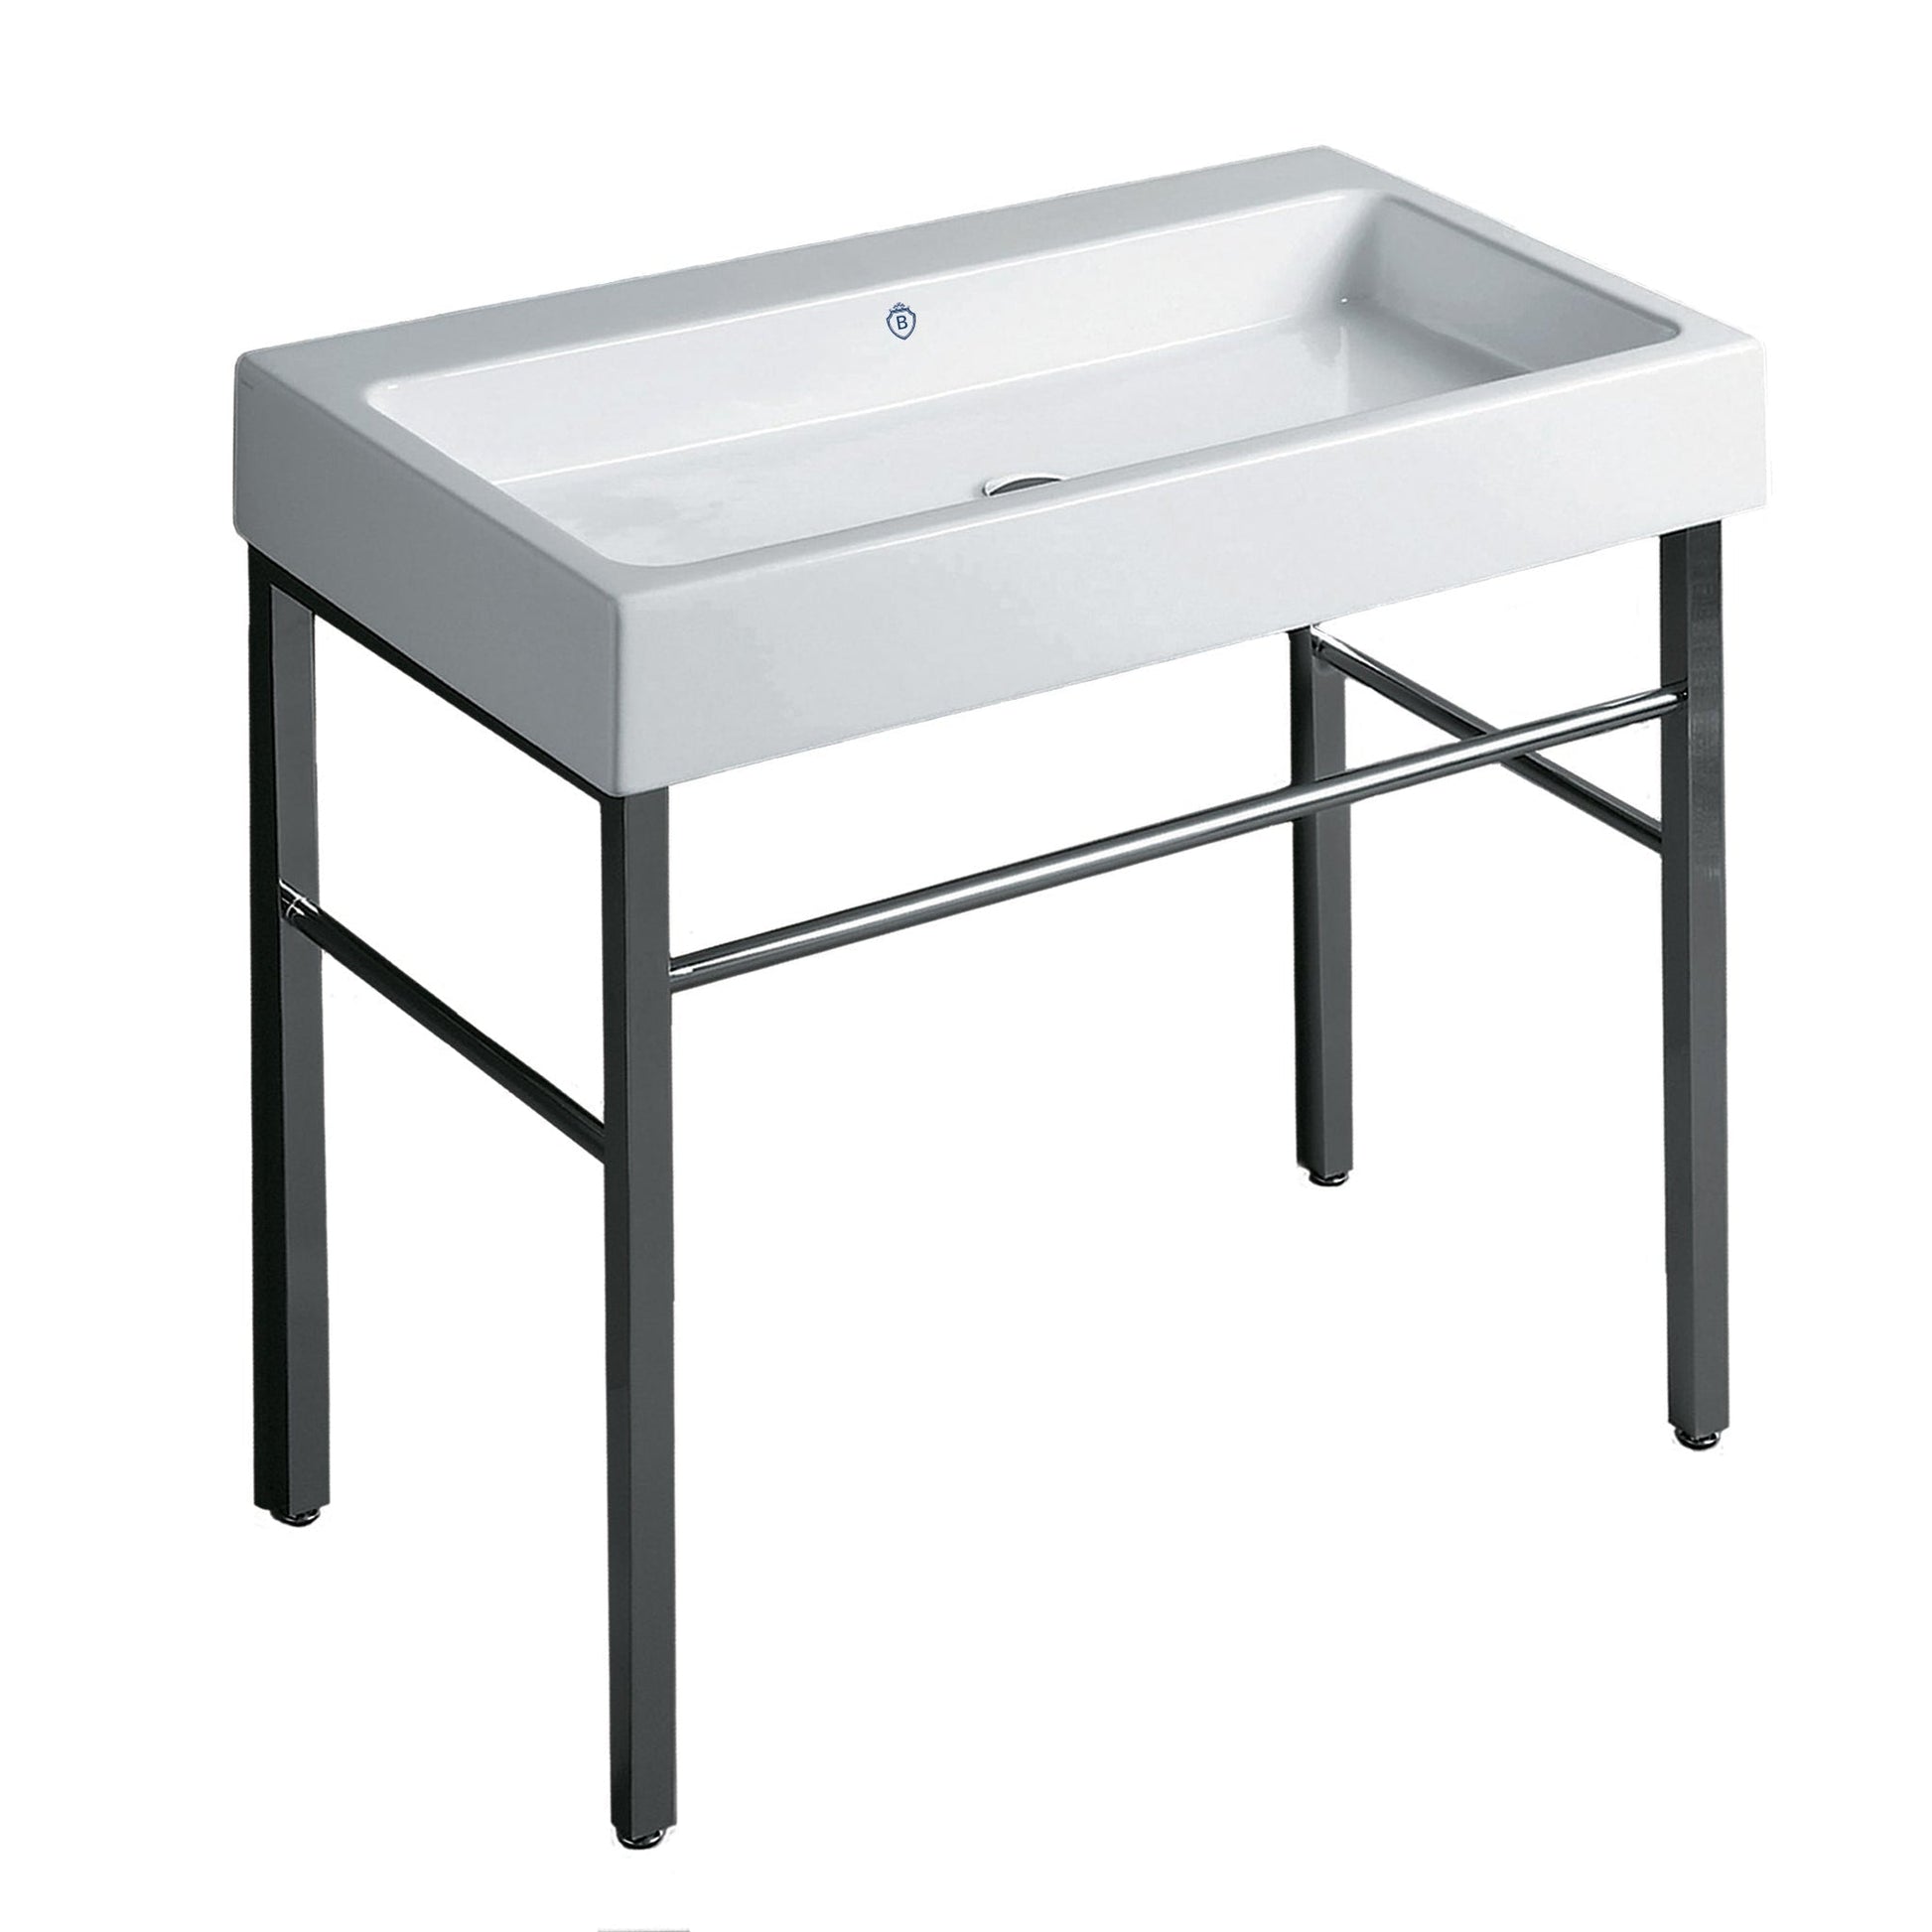 Whitehaus Britannia B-U90-DUCG1-A09 White/Chrome Large Rectangular Sink Console With Front Towel Bar and No Hole Drill